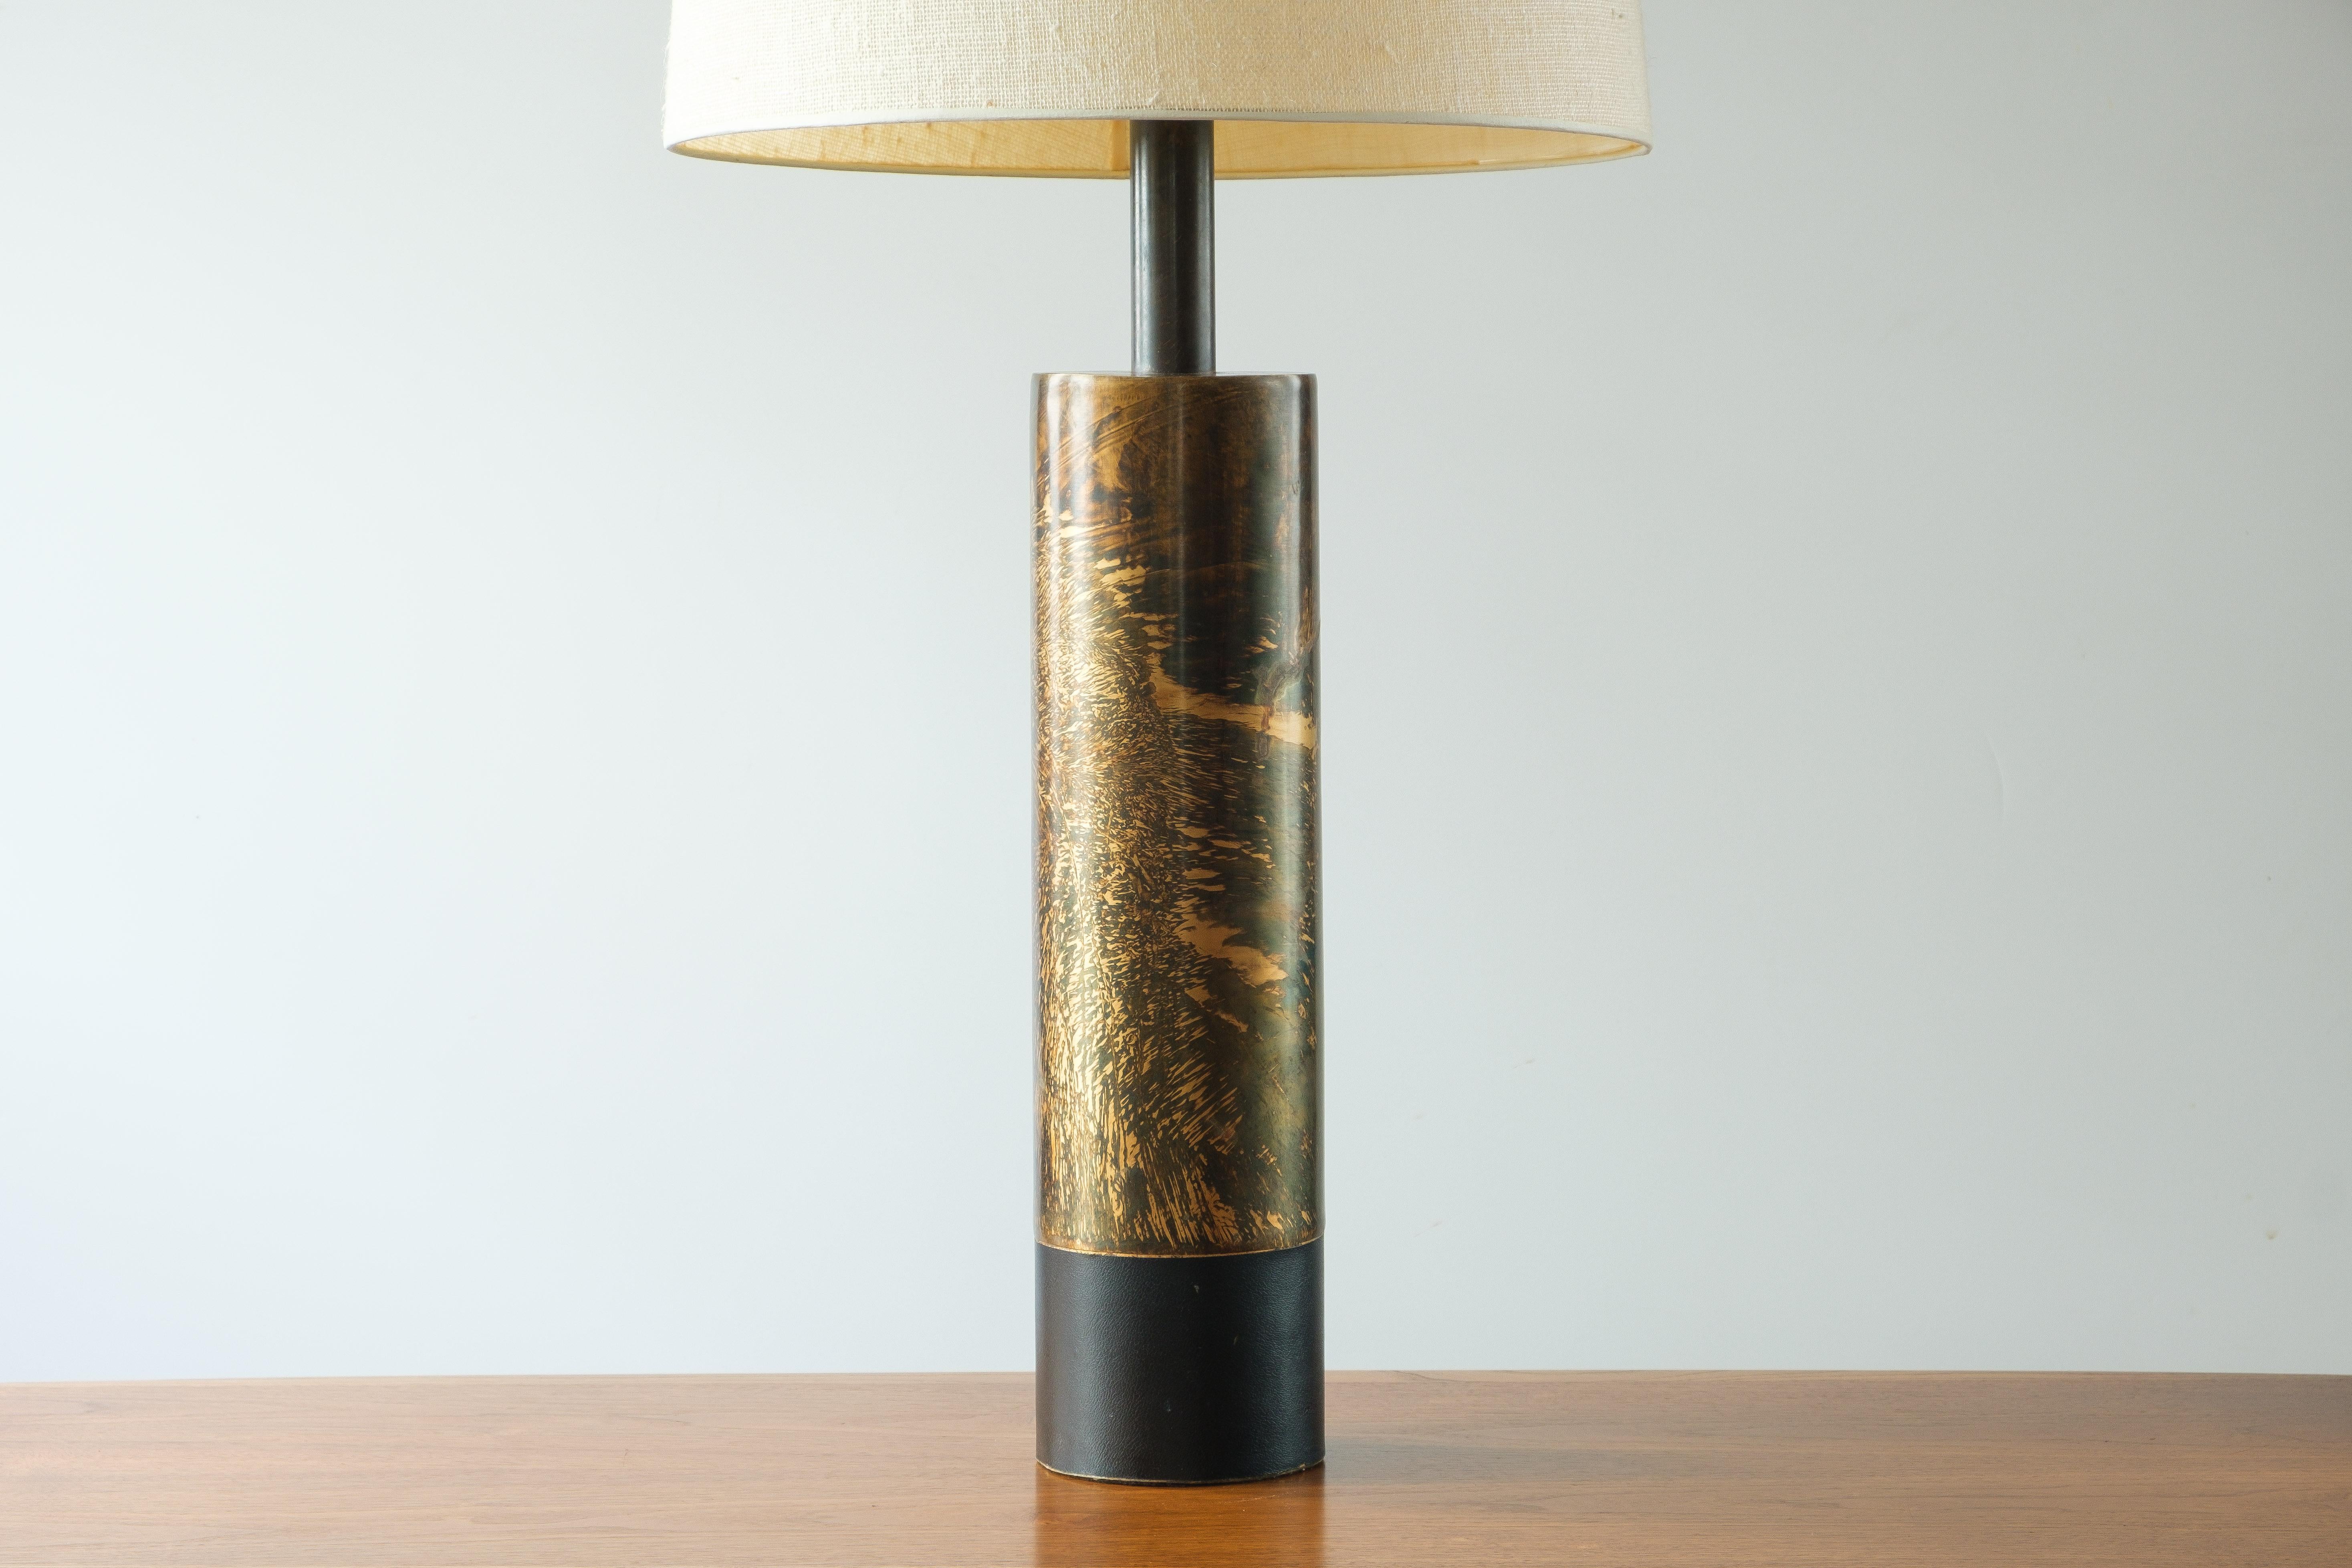 Late 20th Century Laurel Lamp Co. H-890 Acid Etched Brass With Leather Base Cuff Table Lamp For Sale